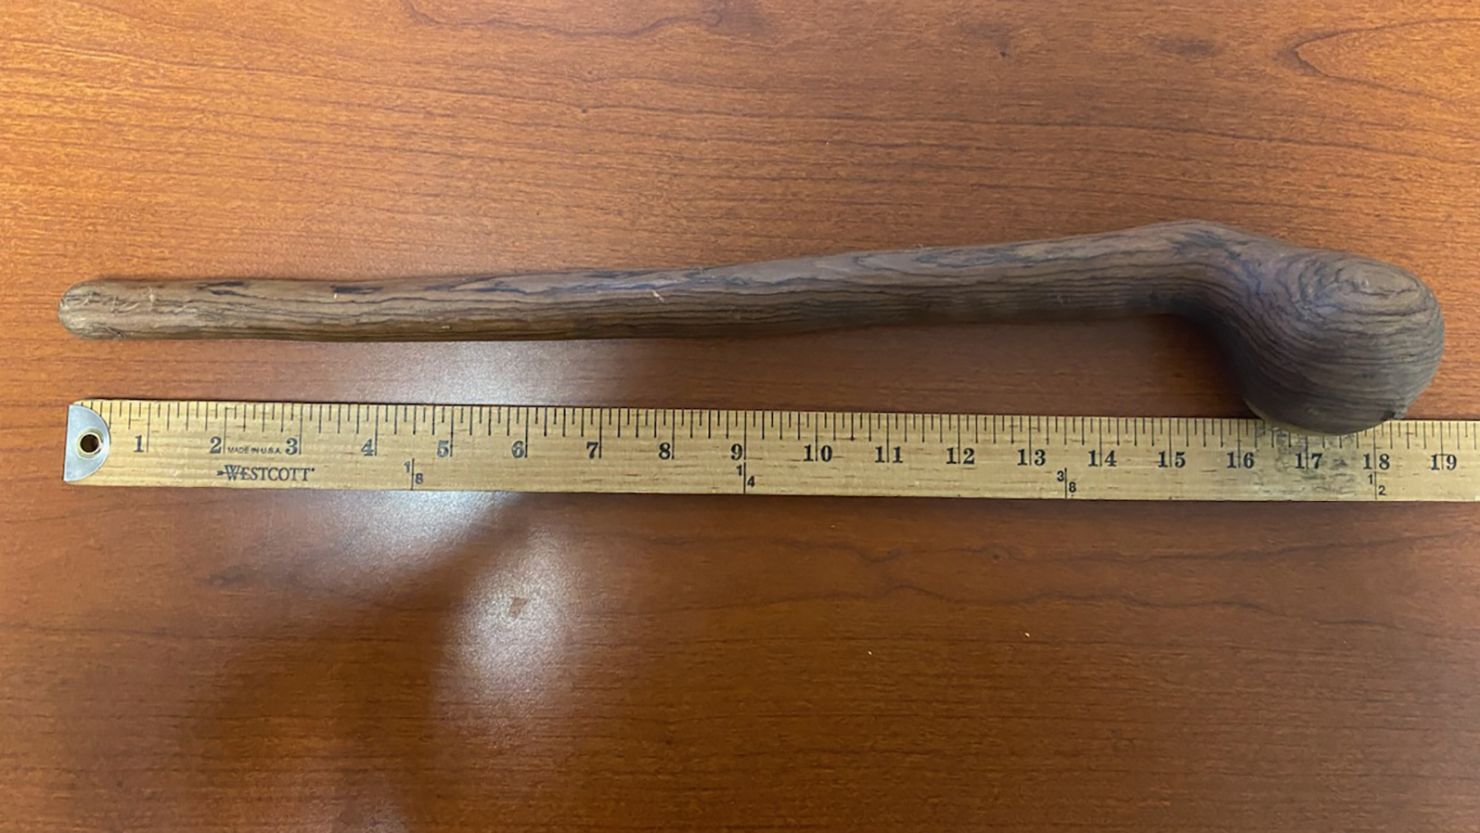 This is a shillelgah, and TSA says it belongs in checked baggage.